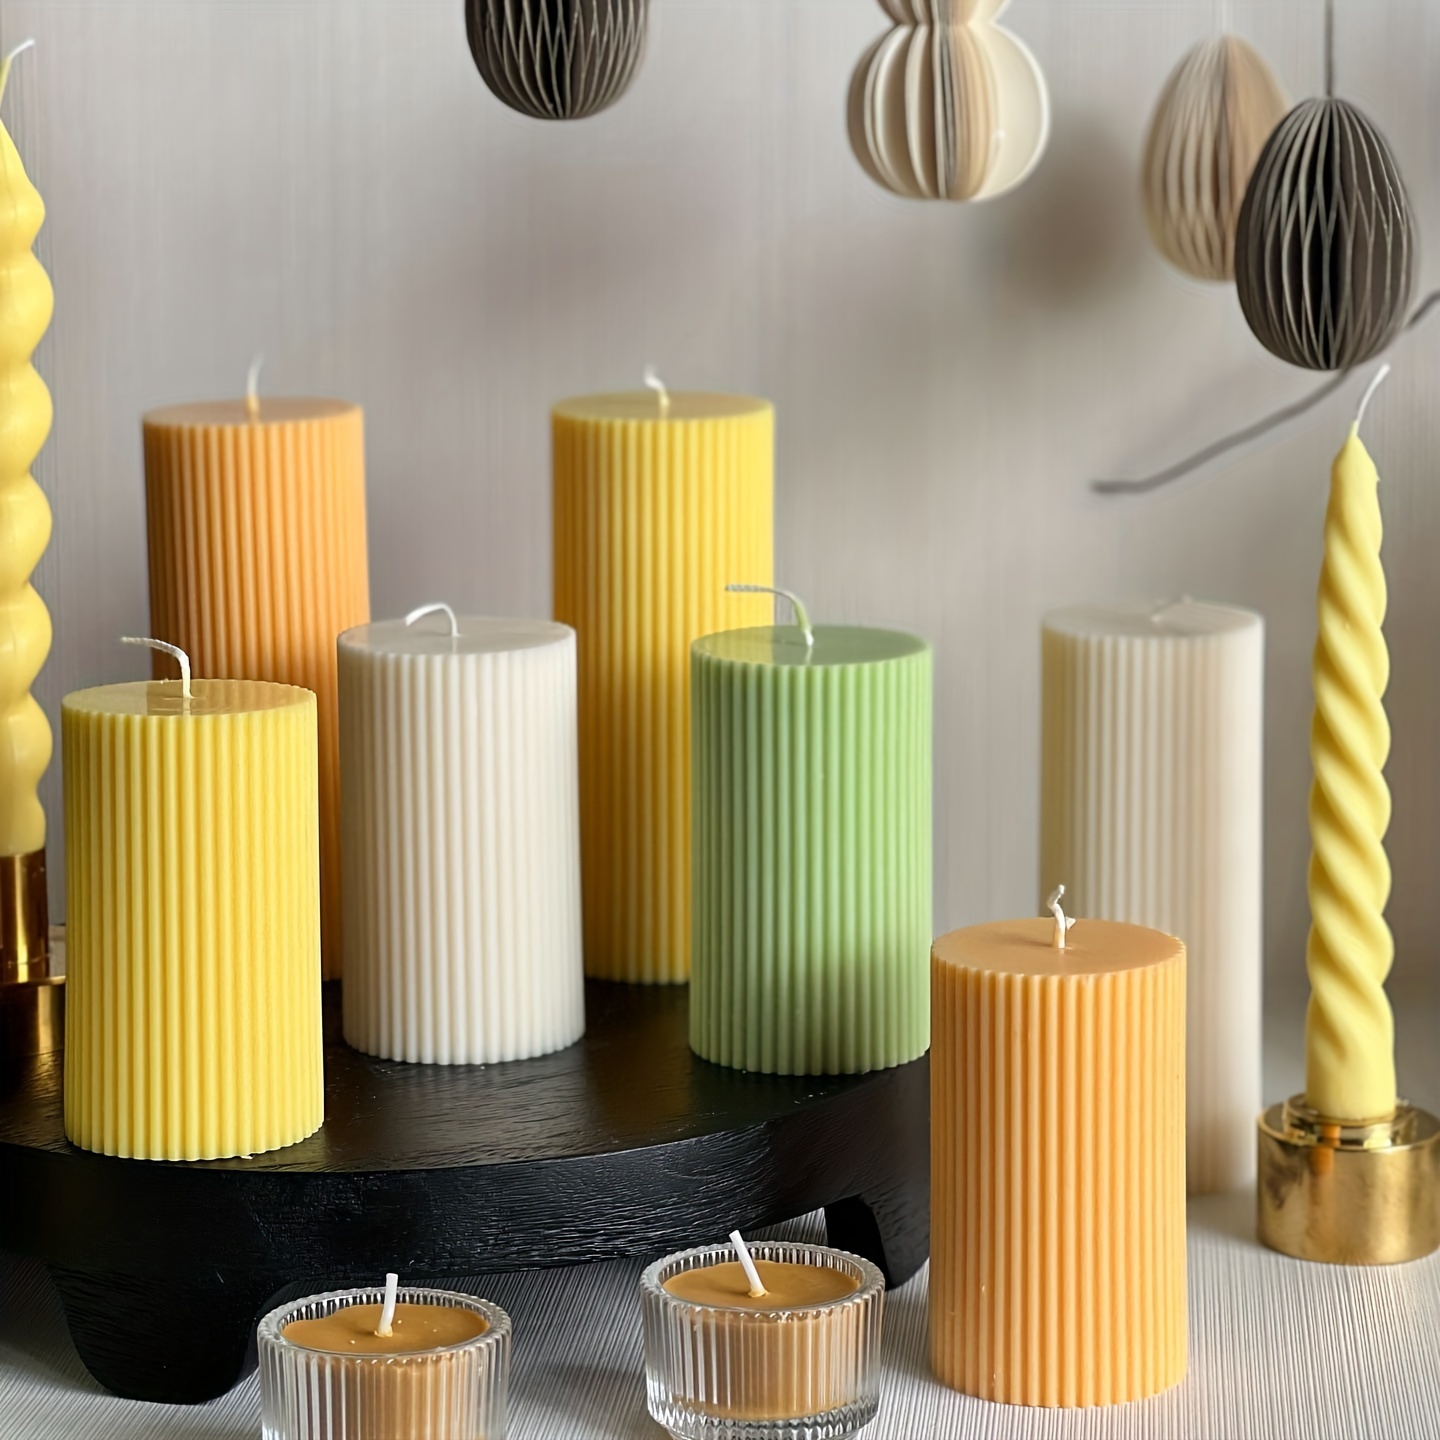 Roman Striped Tall Pillar Candle Molds Cylindrical Aesthetic Twist